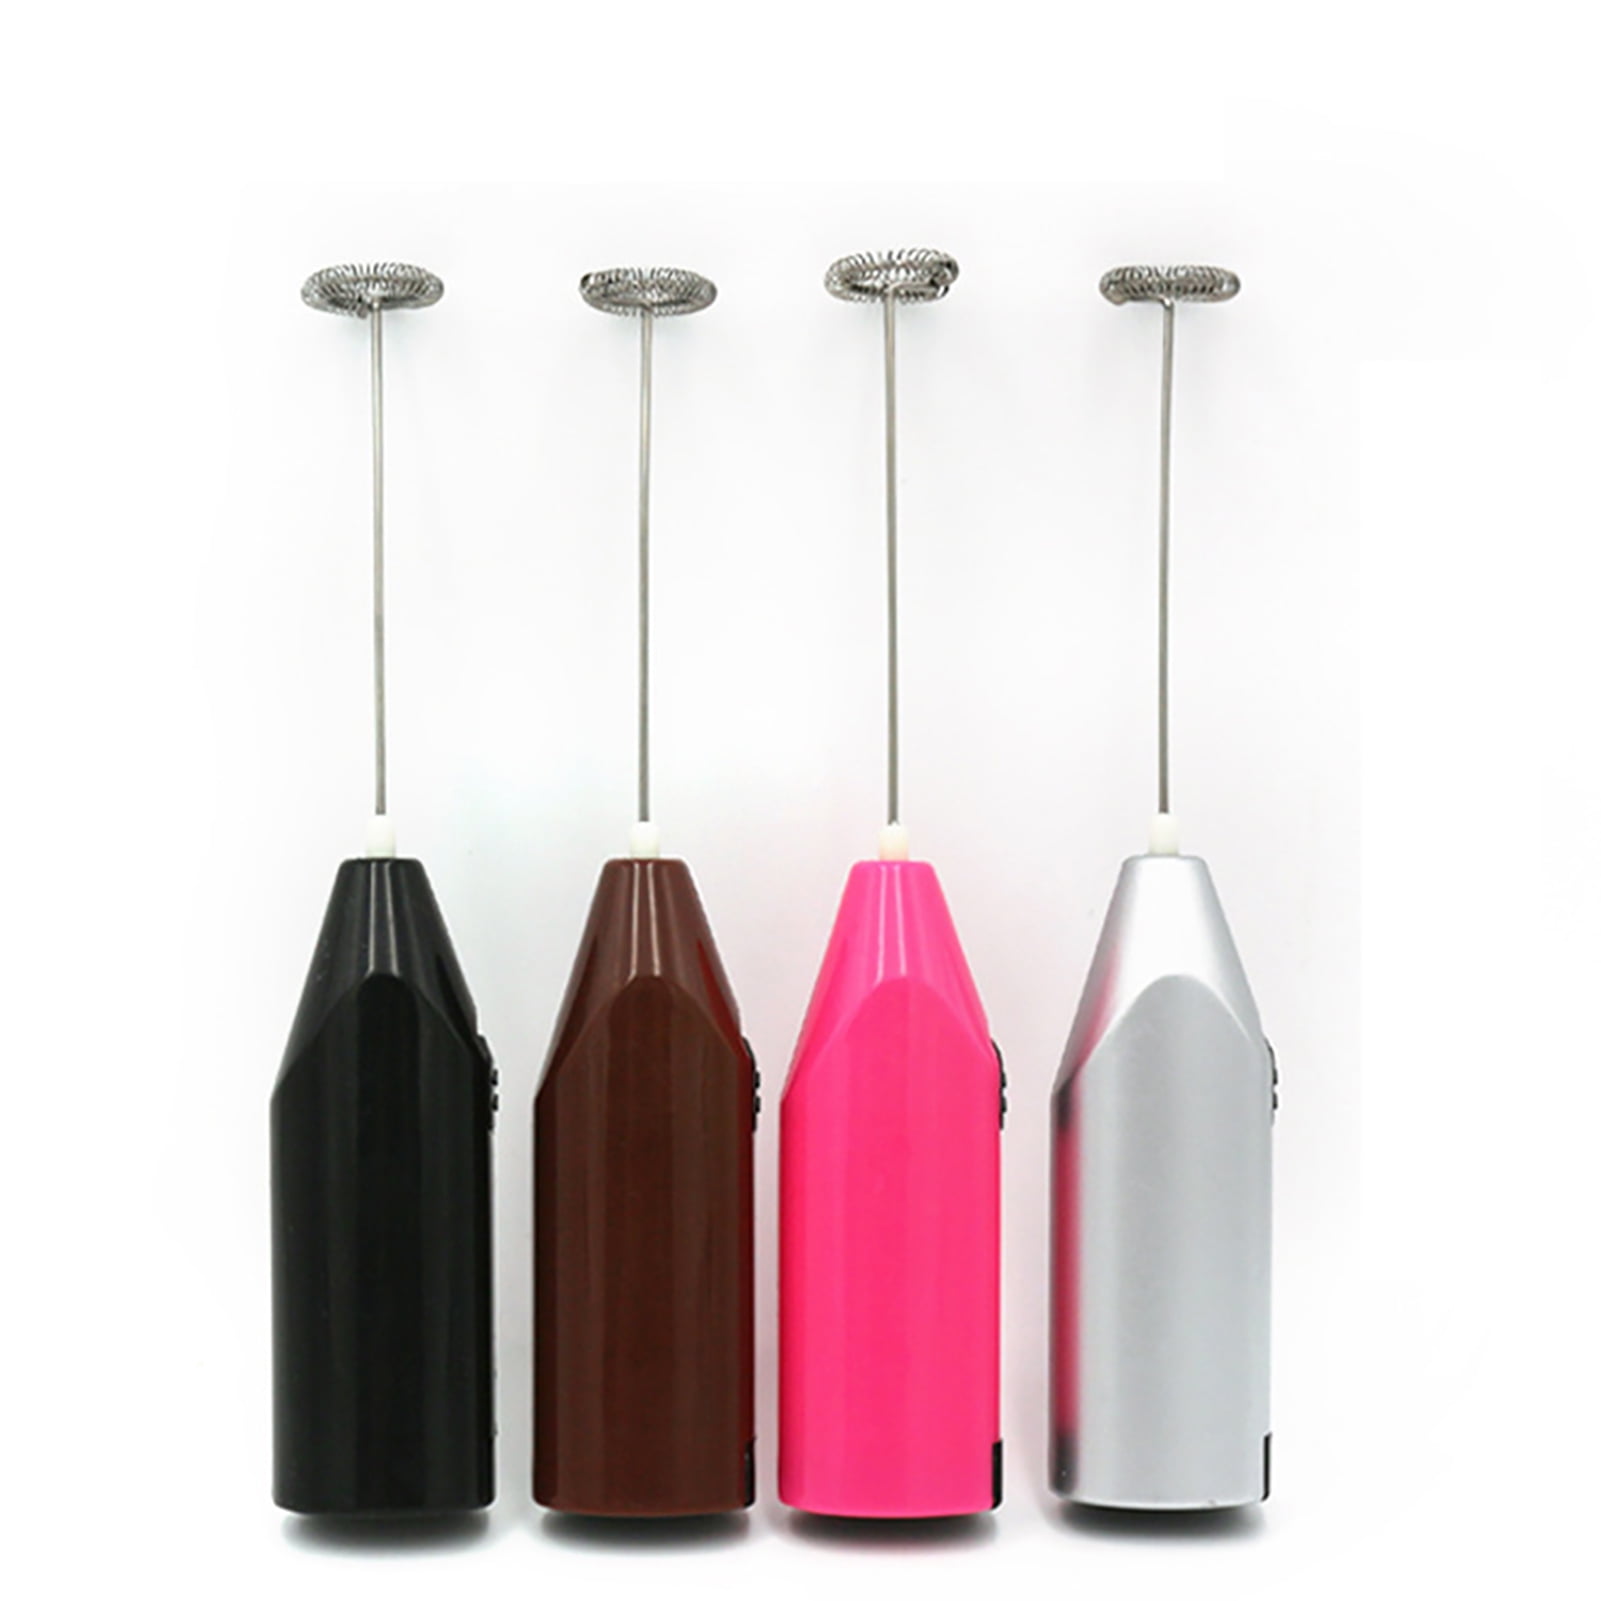 New Handheld Electric Whisk Drink Mixer 2 Spring Whisk Head One Touching Battery  Operated Whisk Perfect for Chocolate 